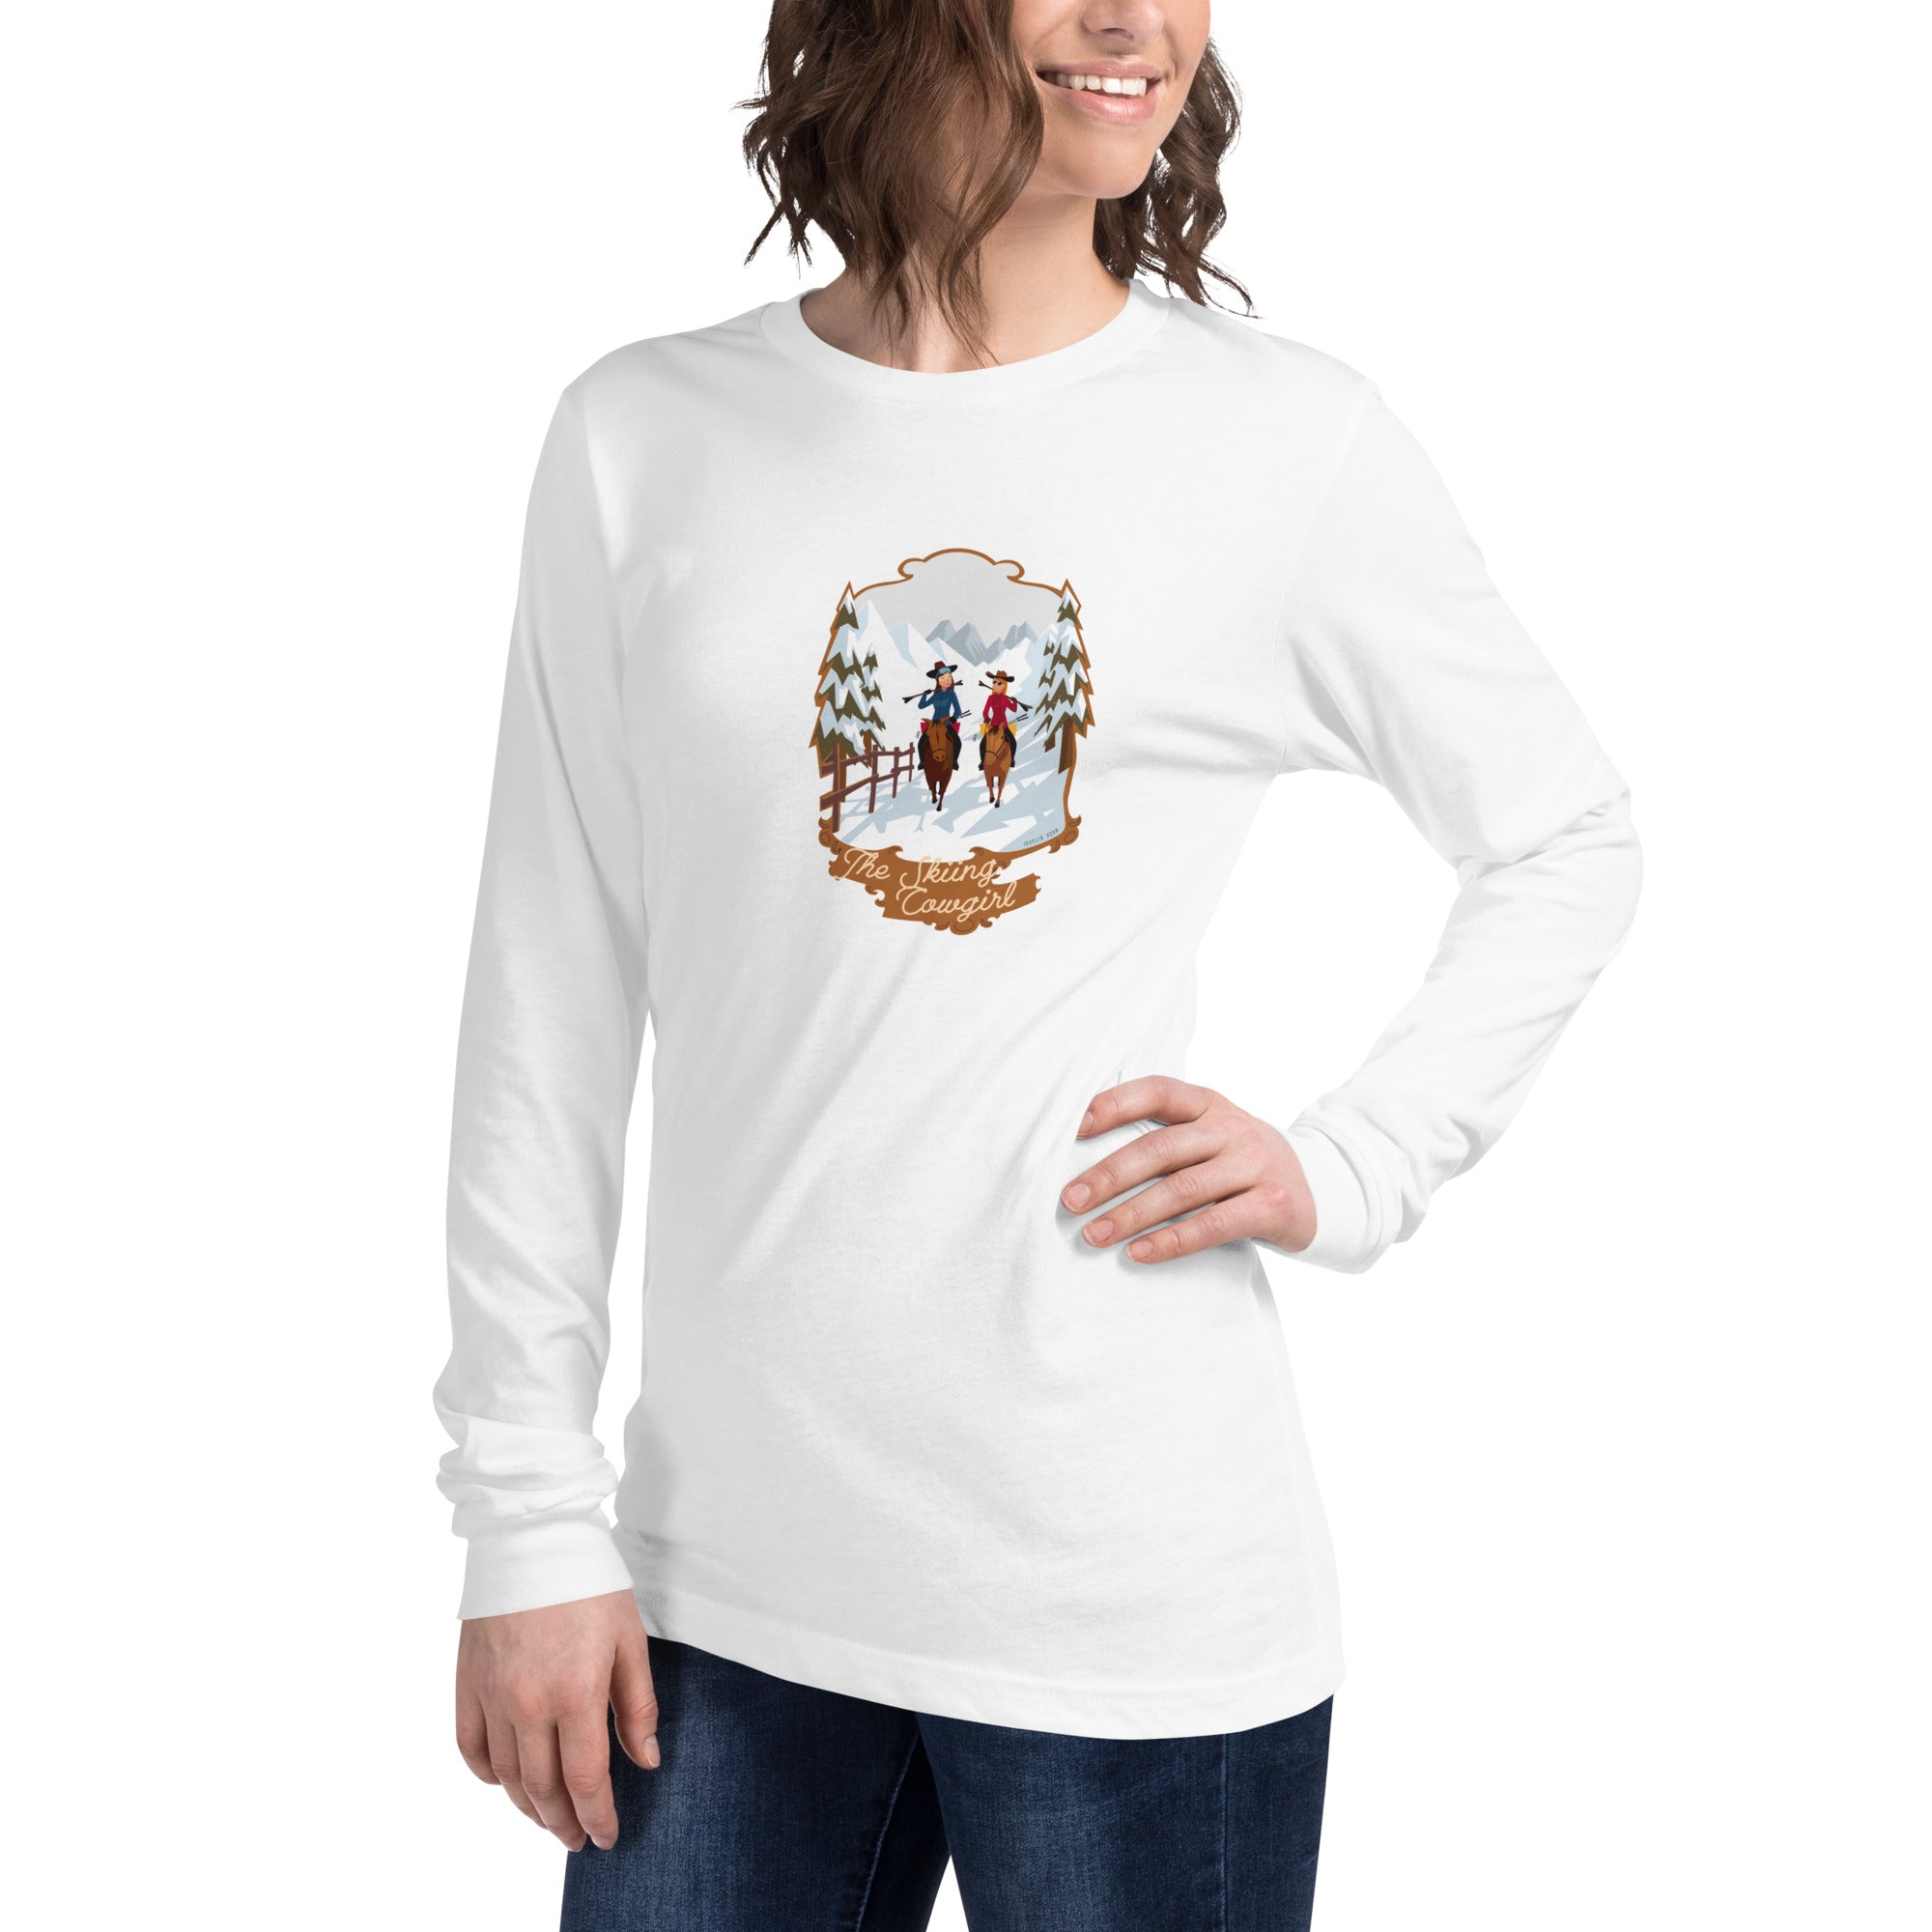 T-shirt unisexe à manches longues The Skiing Cowgirl